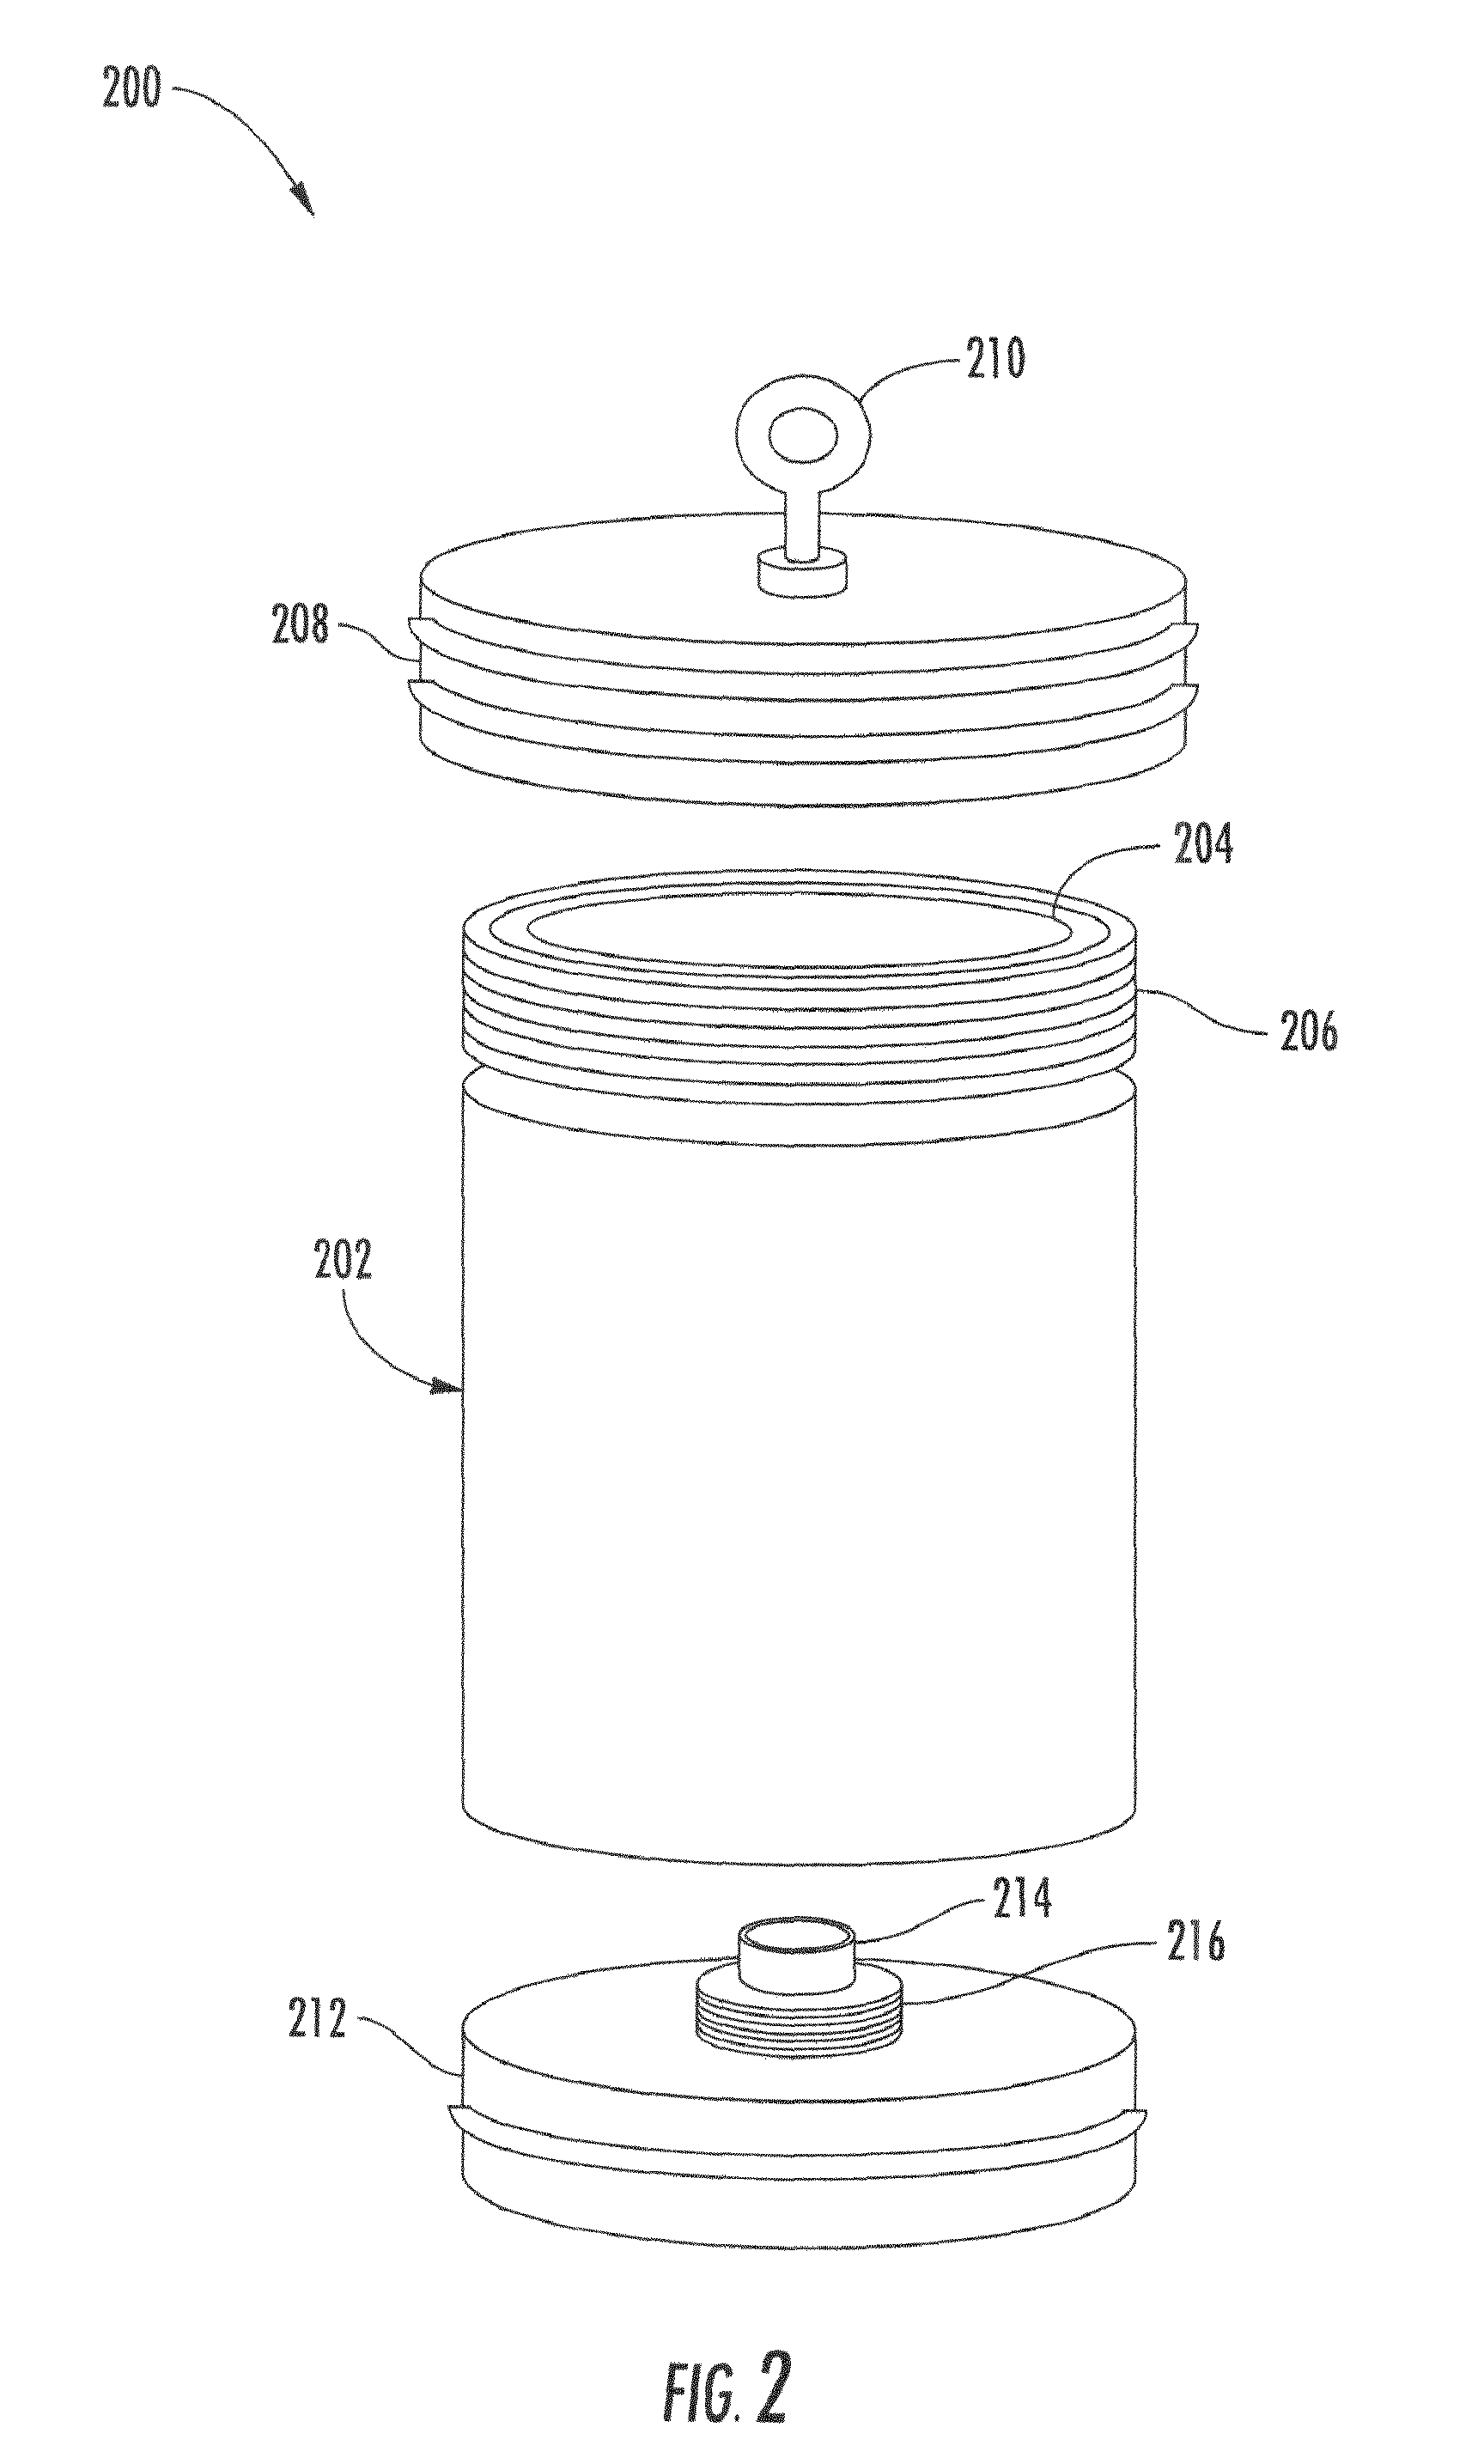 Radiolabeled treatment infusion system, apparatus, and methods of using the same